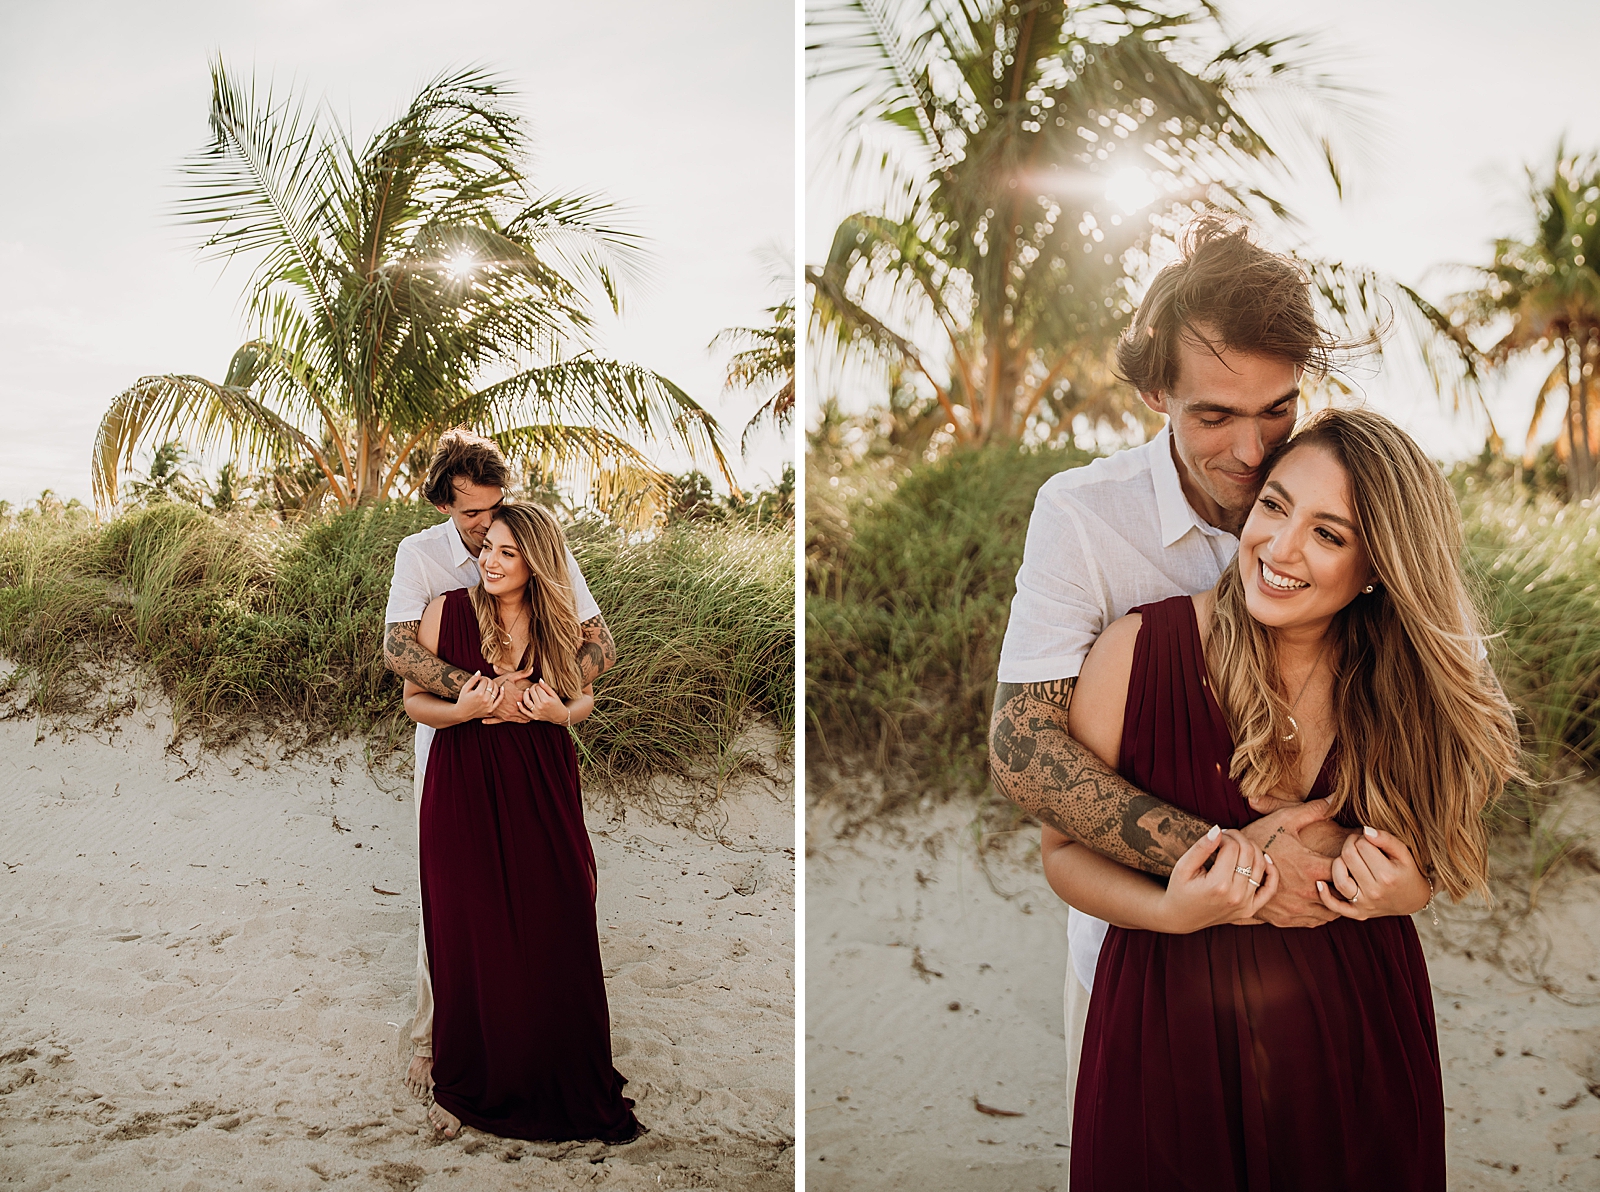 Man wrapping arms around lady on the beach Key Biscayne Beach Engagement Photography captured by South Florida Family Photographer Maggie Alvarez Photography